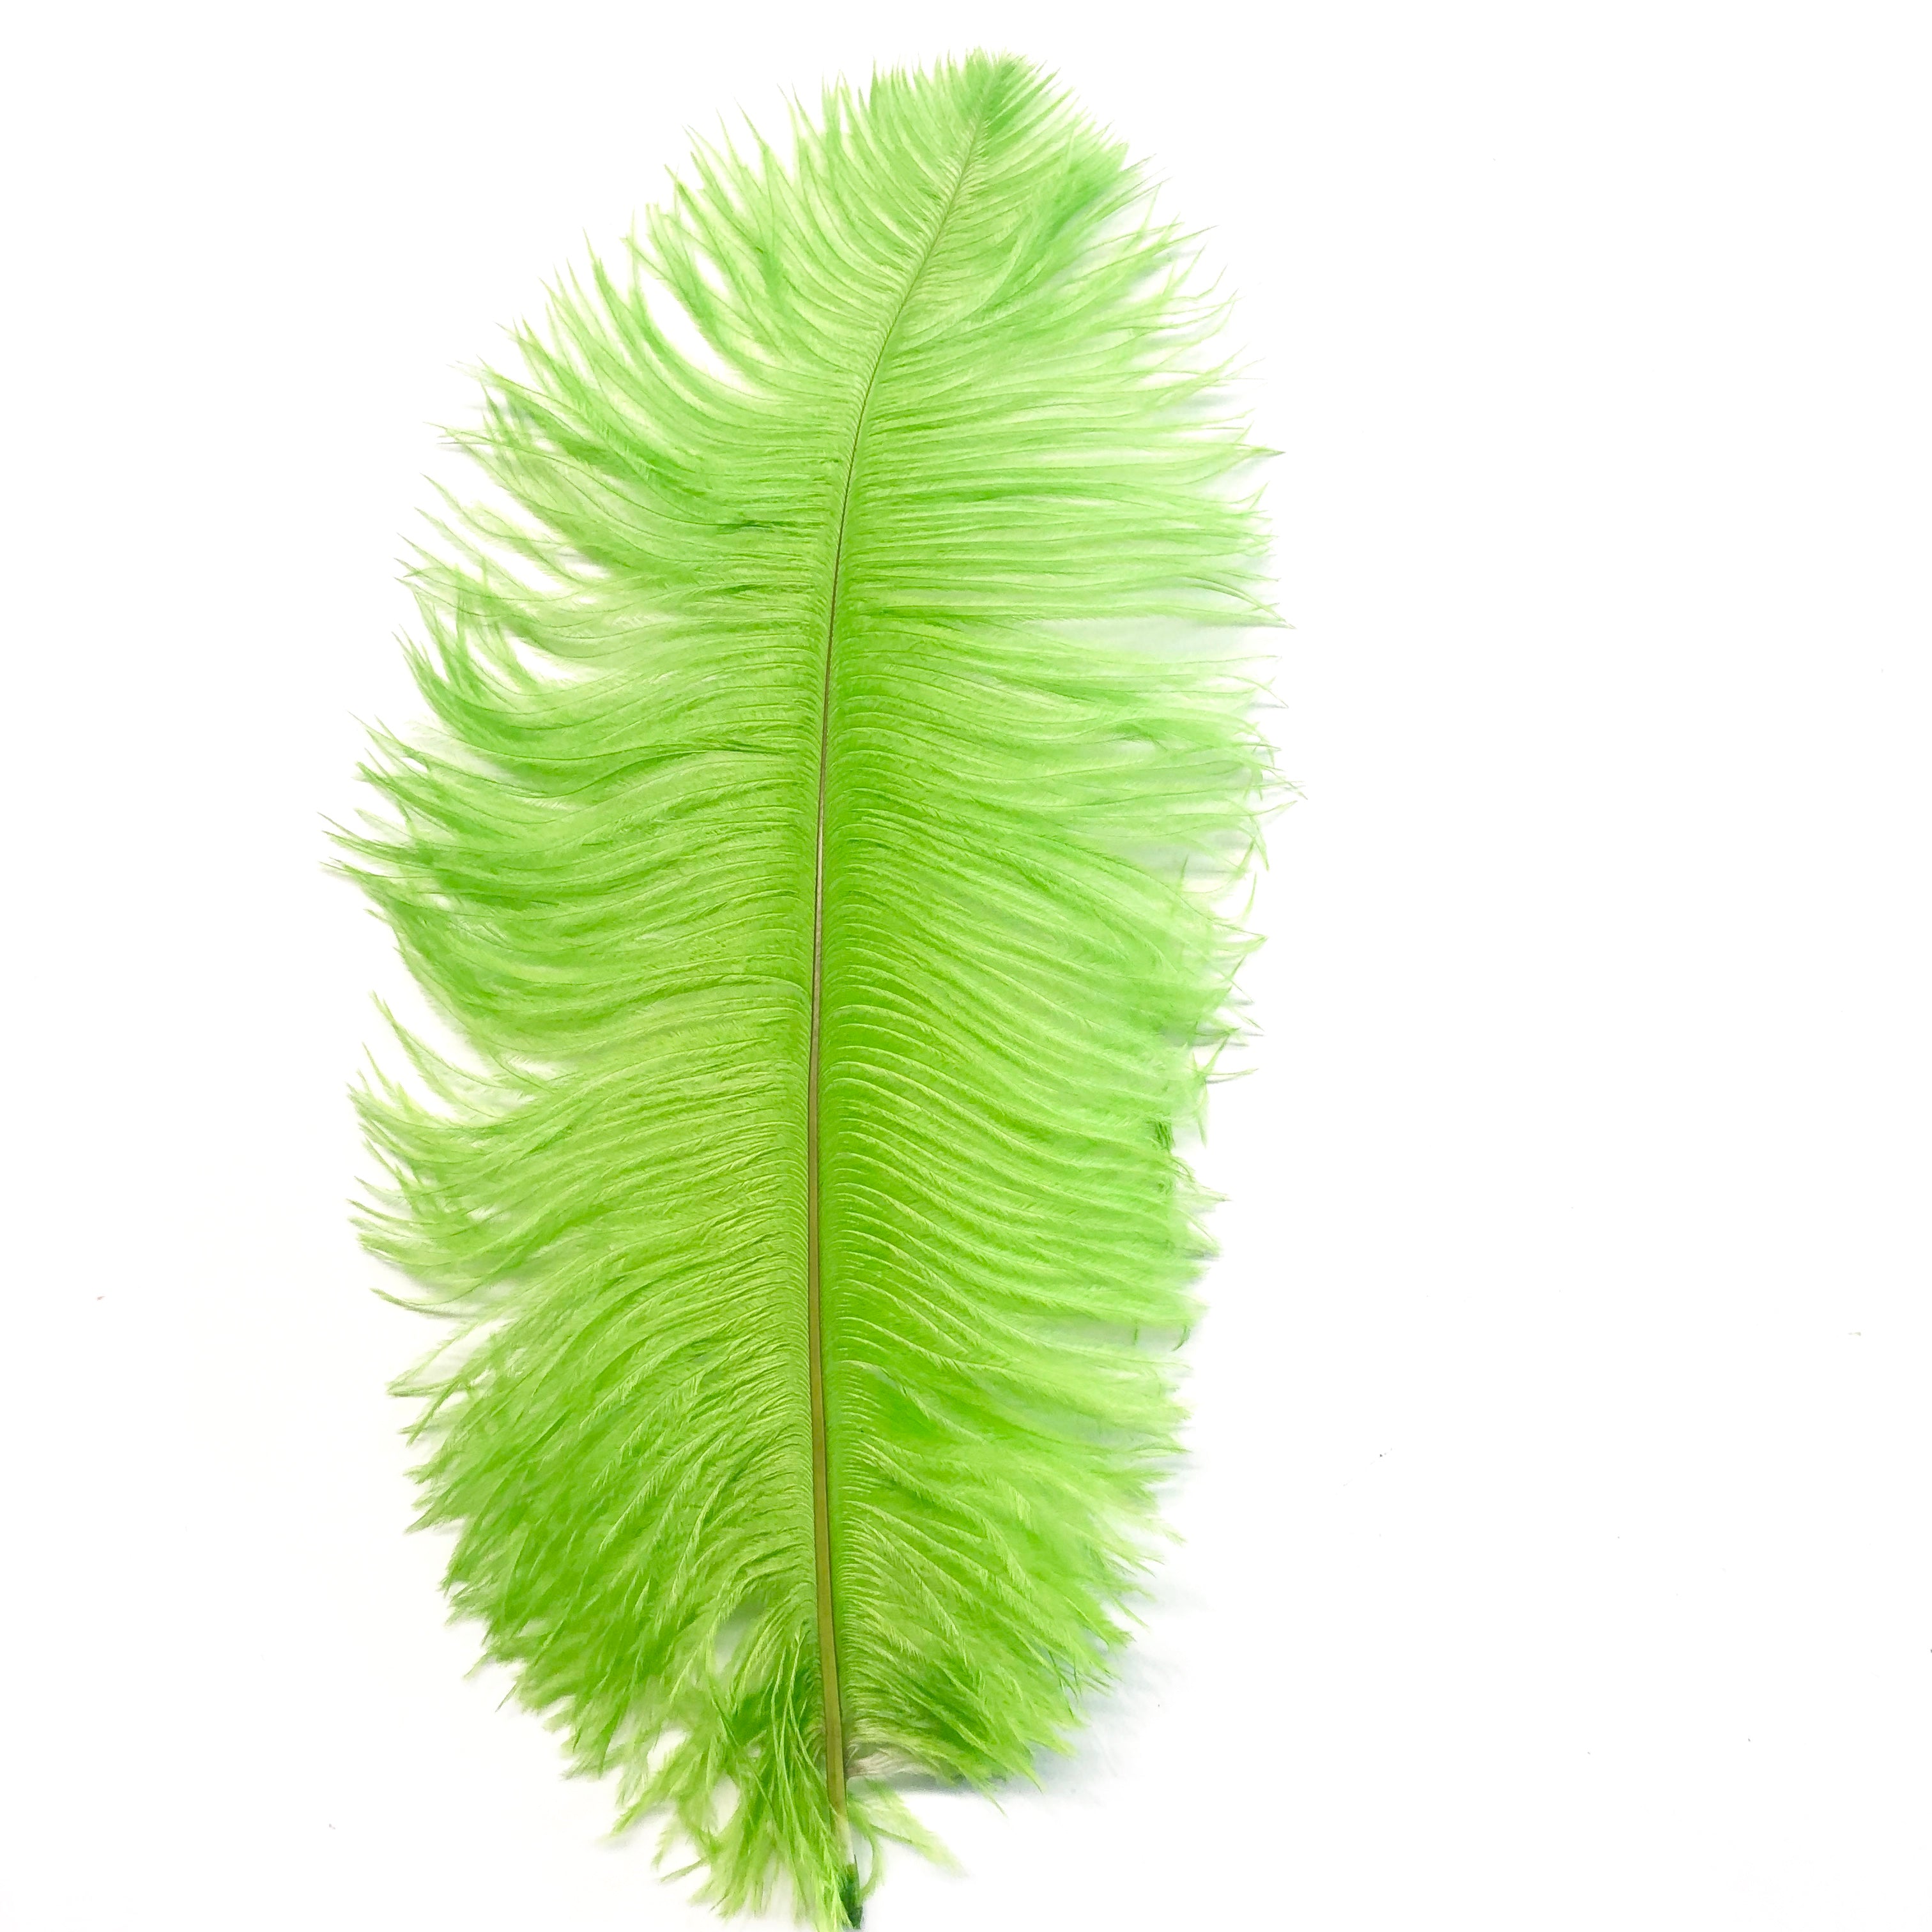 Ostrich Feather Drab 37-42cm x 5 pcs - Lime Green ((SECONDS))